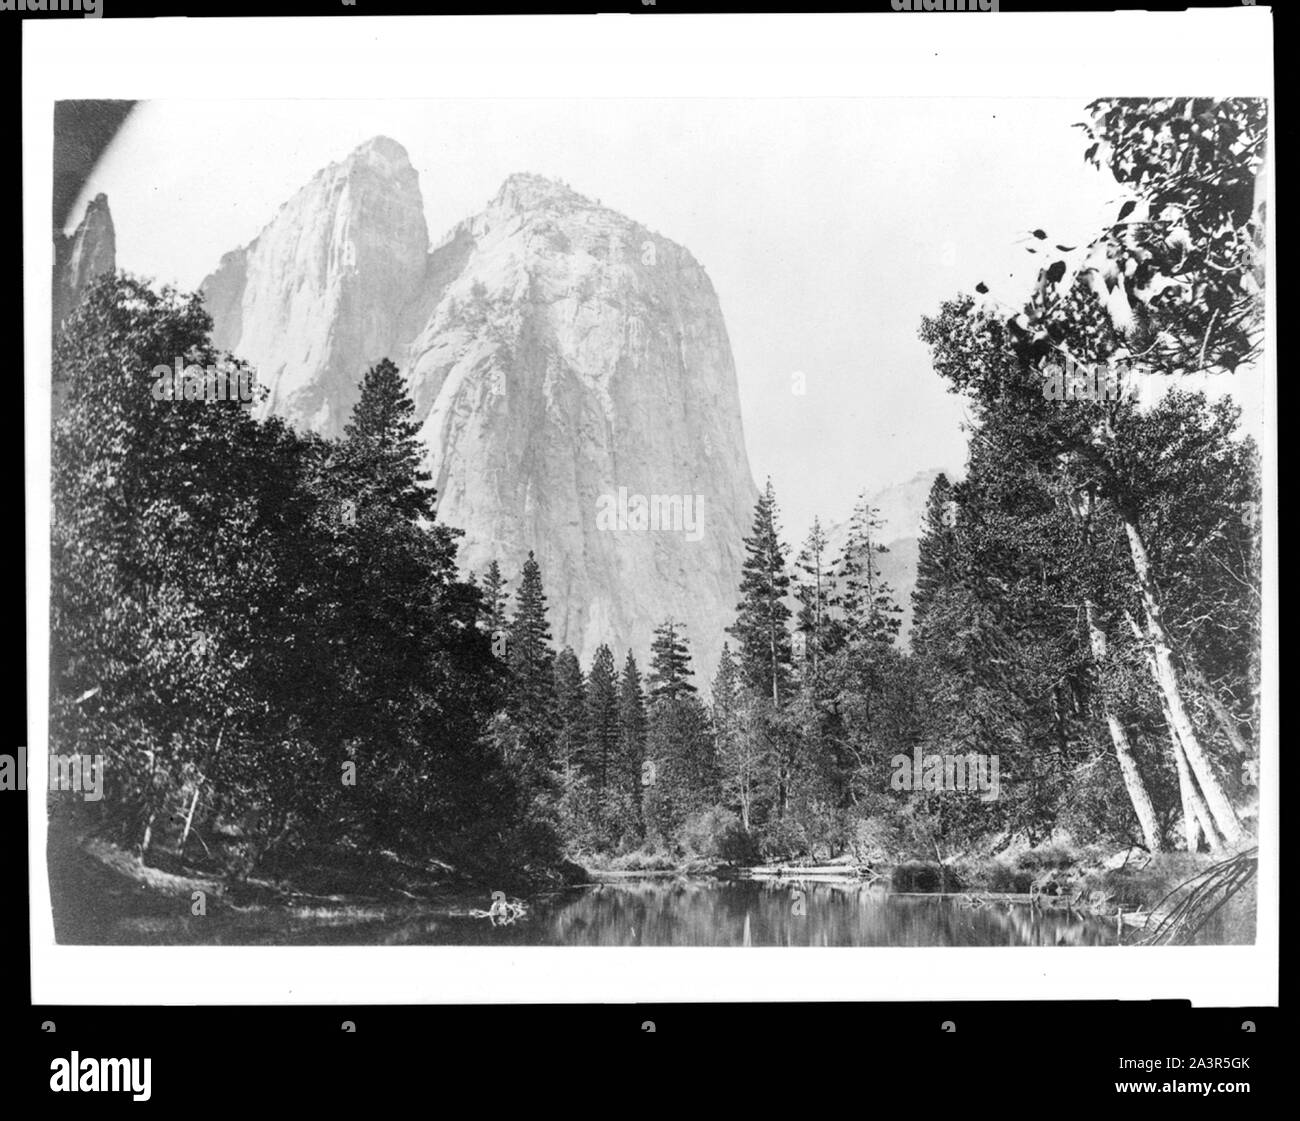 Stream and trees with mountain in background, Yosemite National Park, Calif. Stock Photo